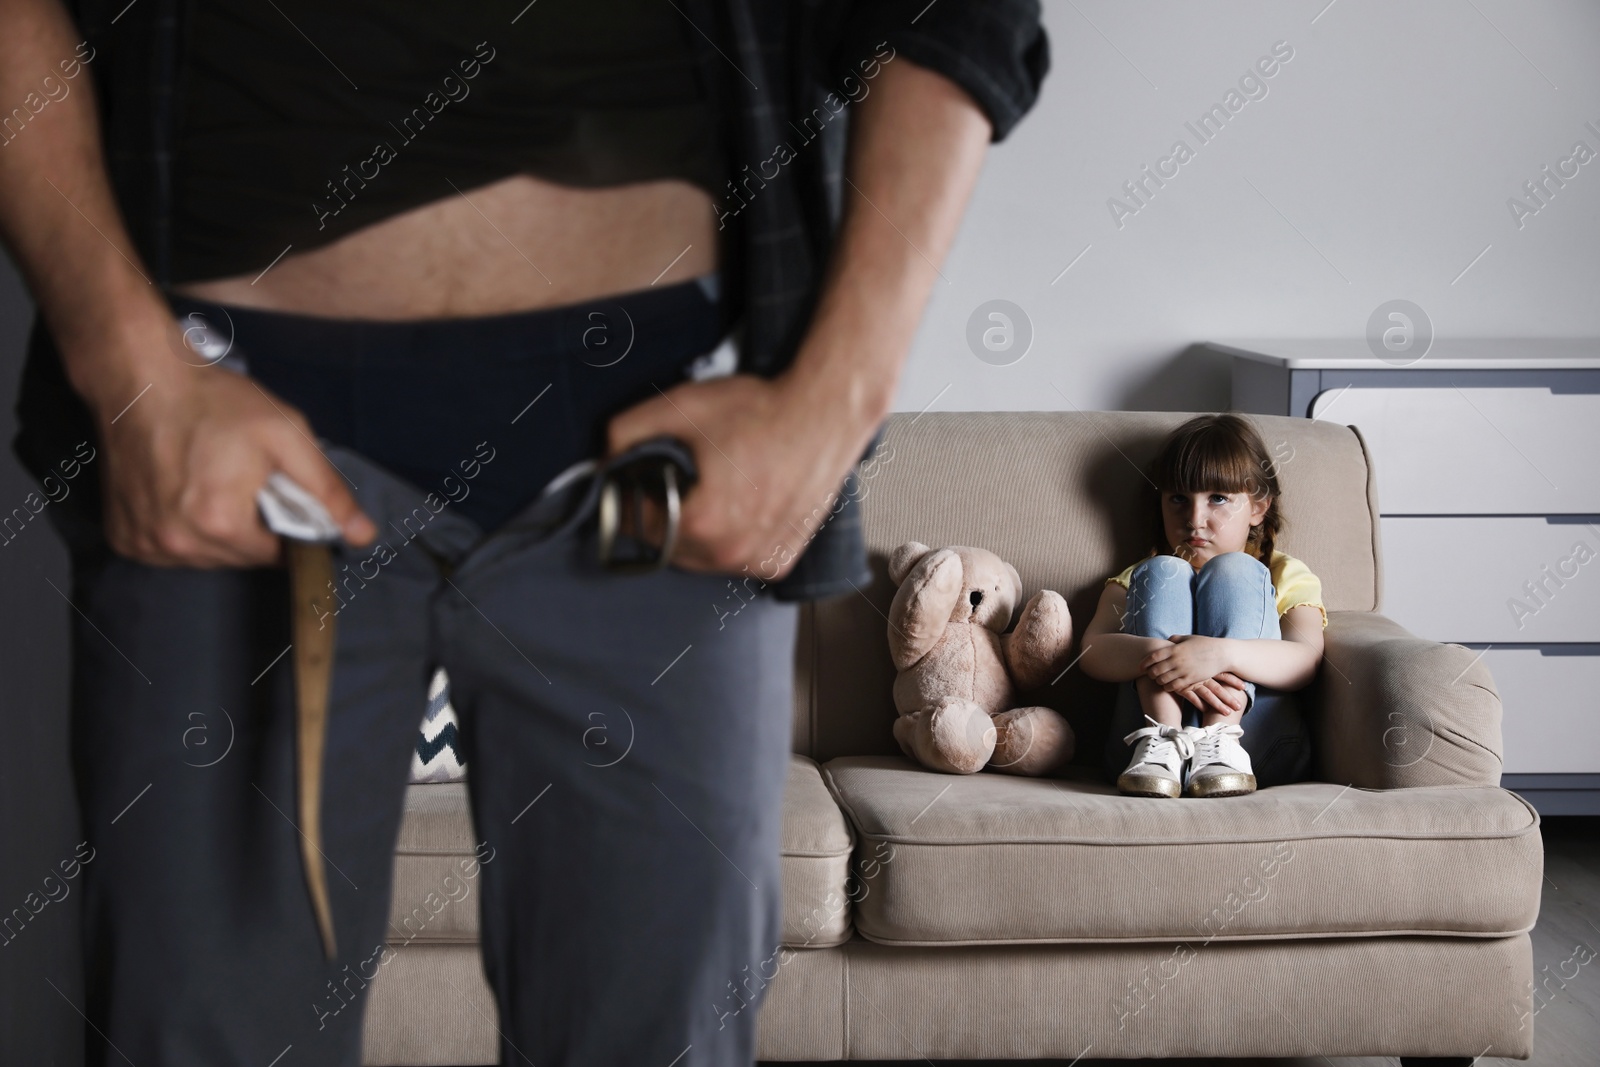 Photo of Man with unzipped pants standing near scared little girl on sofa indoors. Child in danger